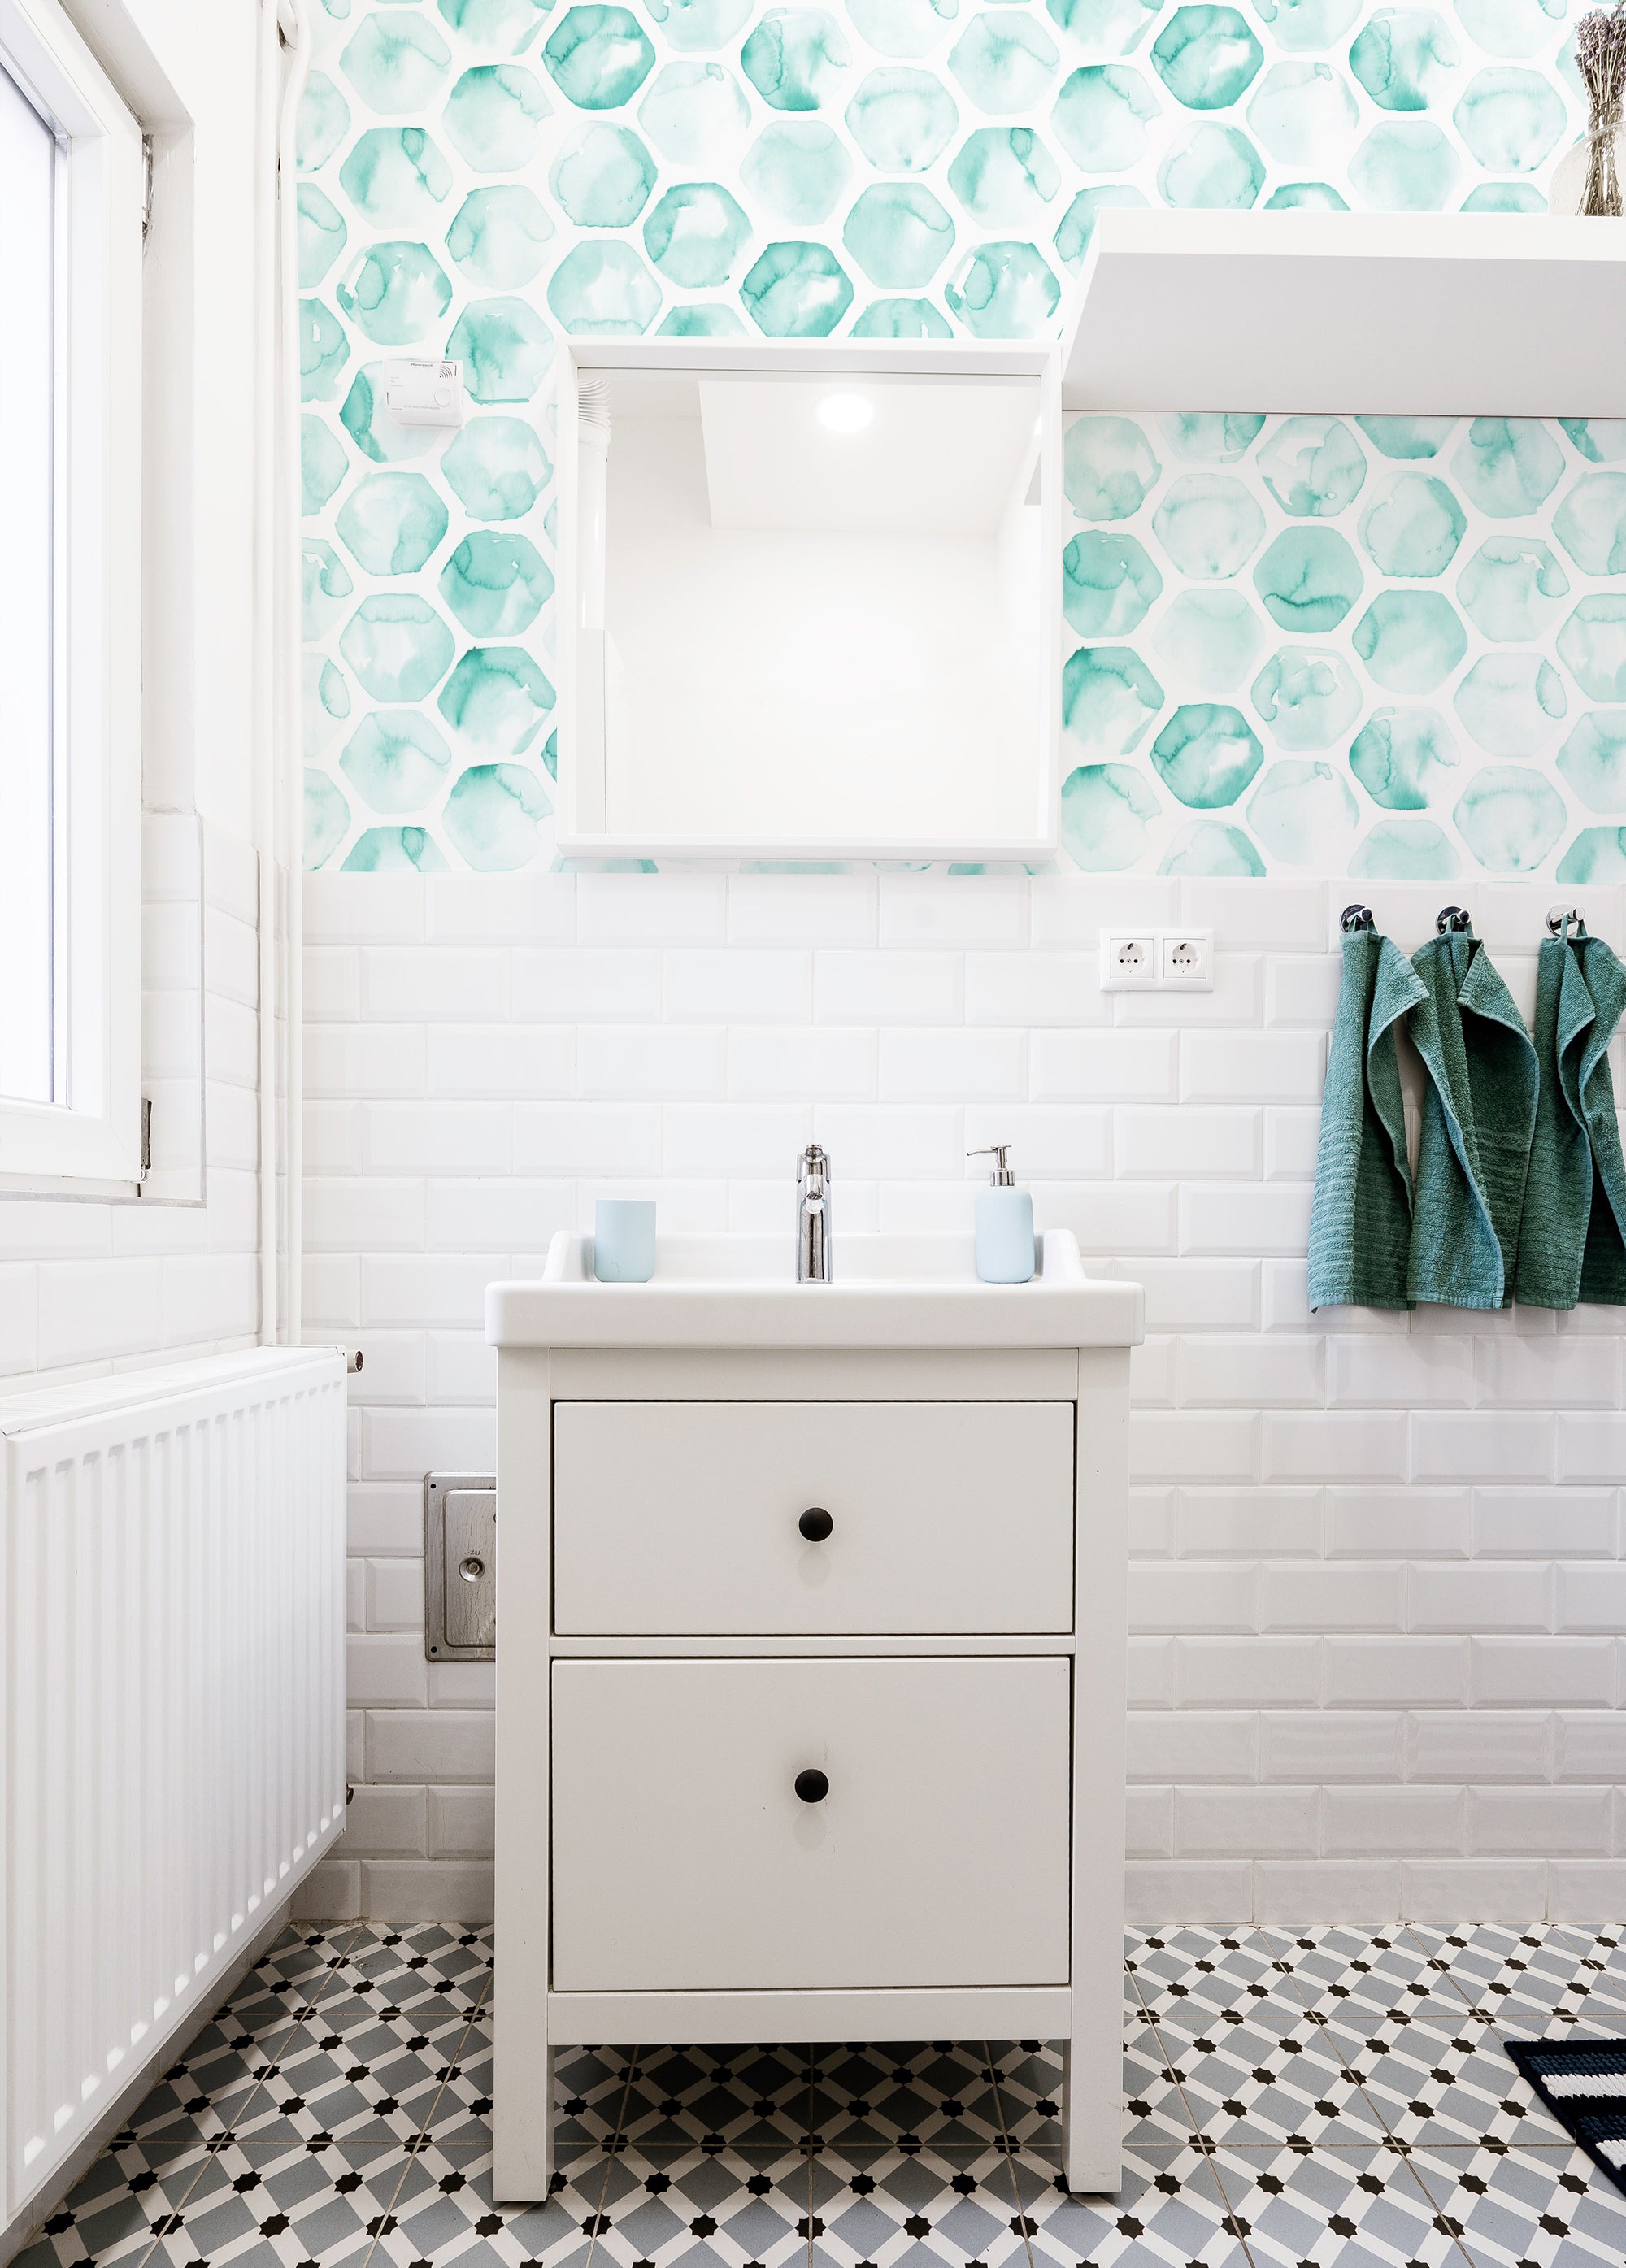 A modern bathroom featuring a vibrant turquoise hexagonal honeycomb wallpaper with a watercolor effect. The wallpaper adds a splash of color against the white subway tiles, complementing the minimalist white sink and turquoise towels.